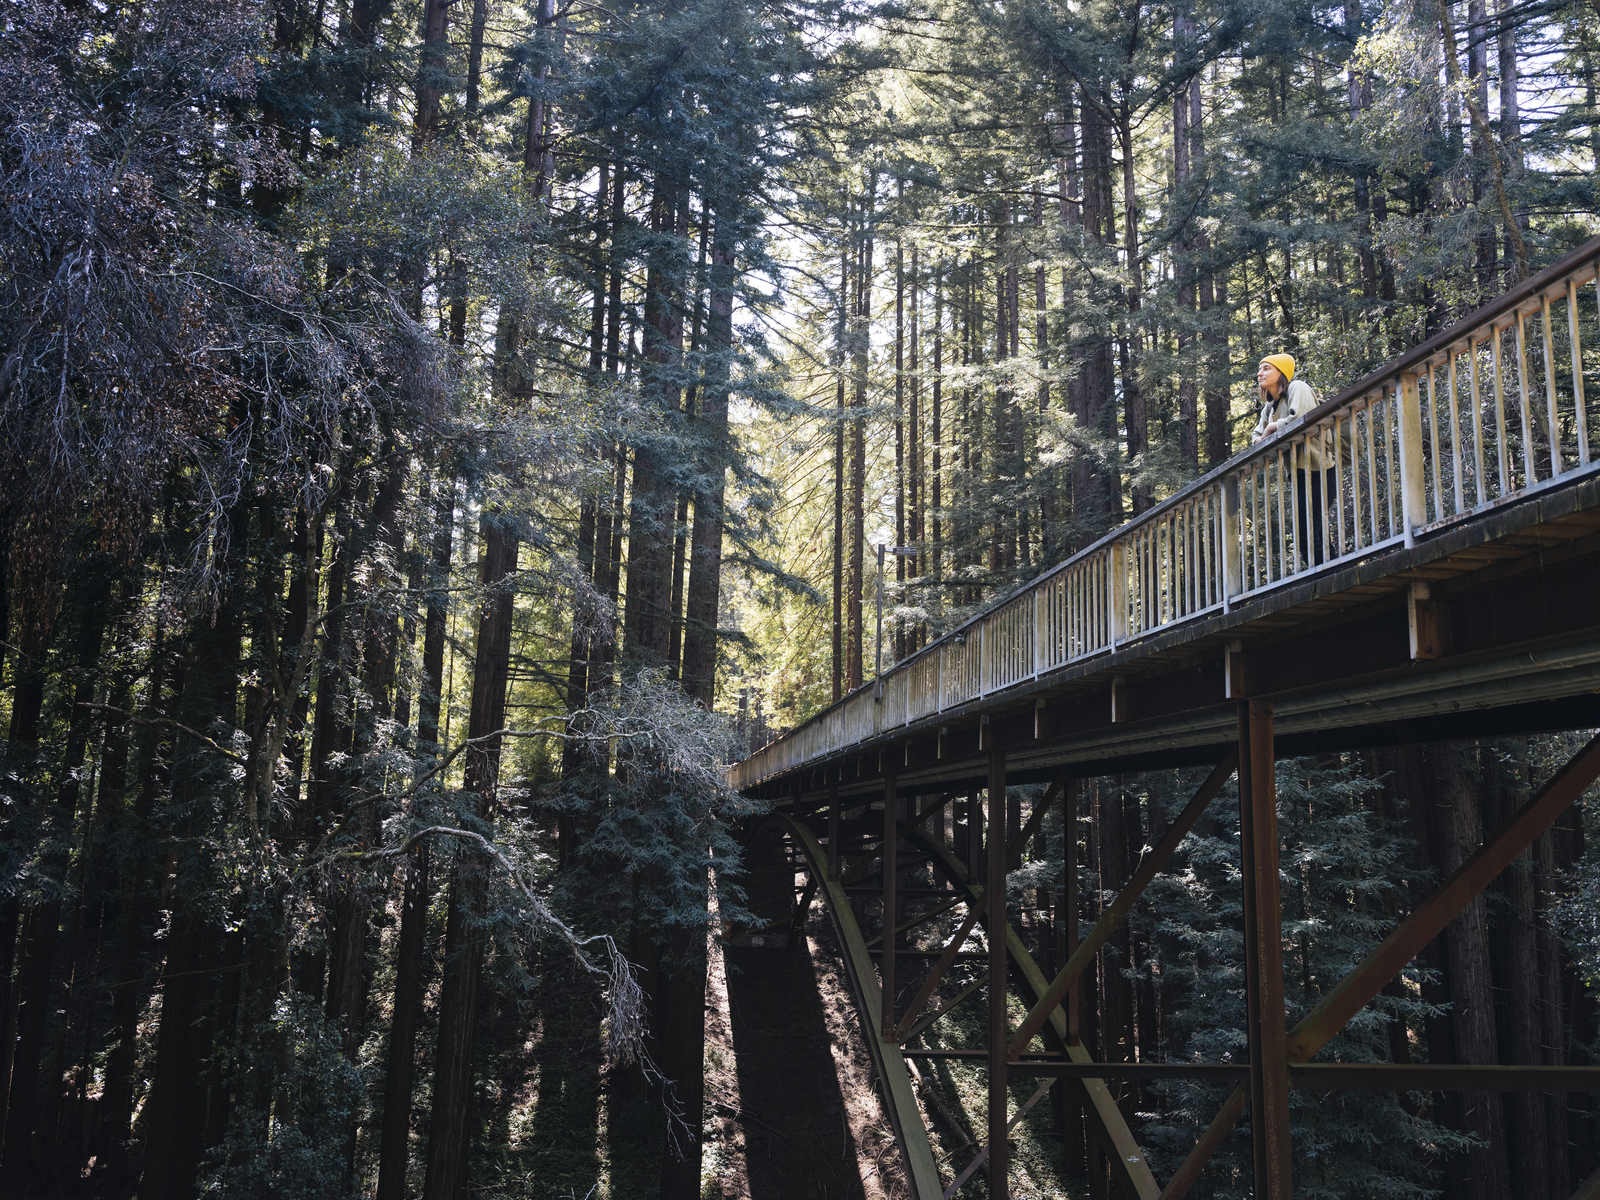 A footbridge over a deep canyon in a redwood forest. A student in a yellow hat stands at the railing and looks pensively up into the trees.